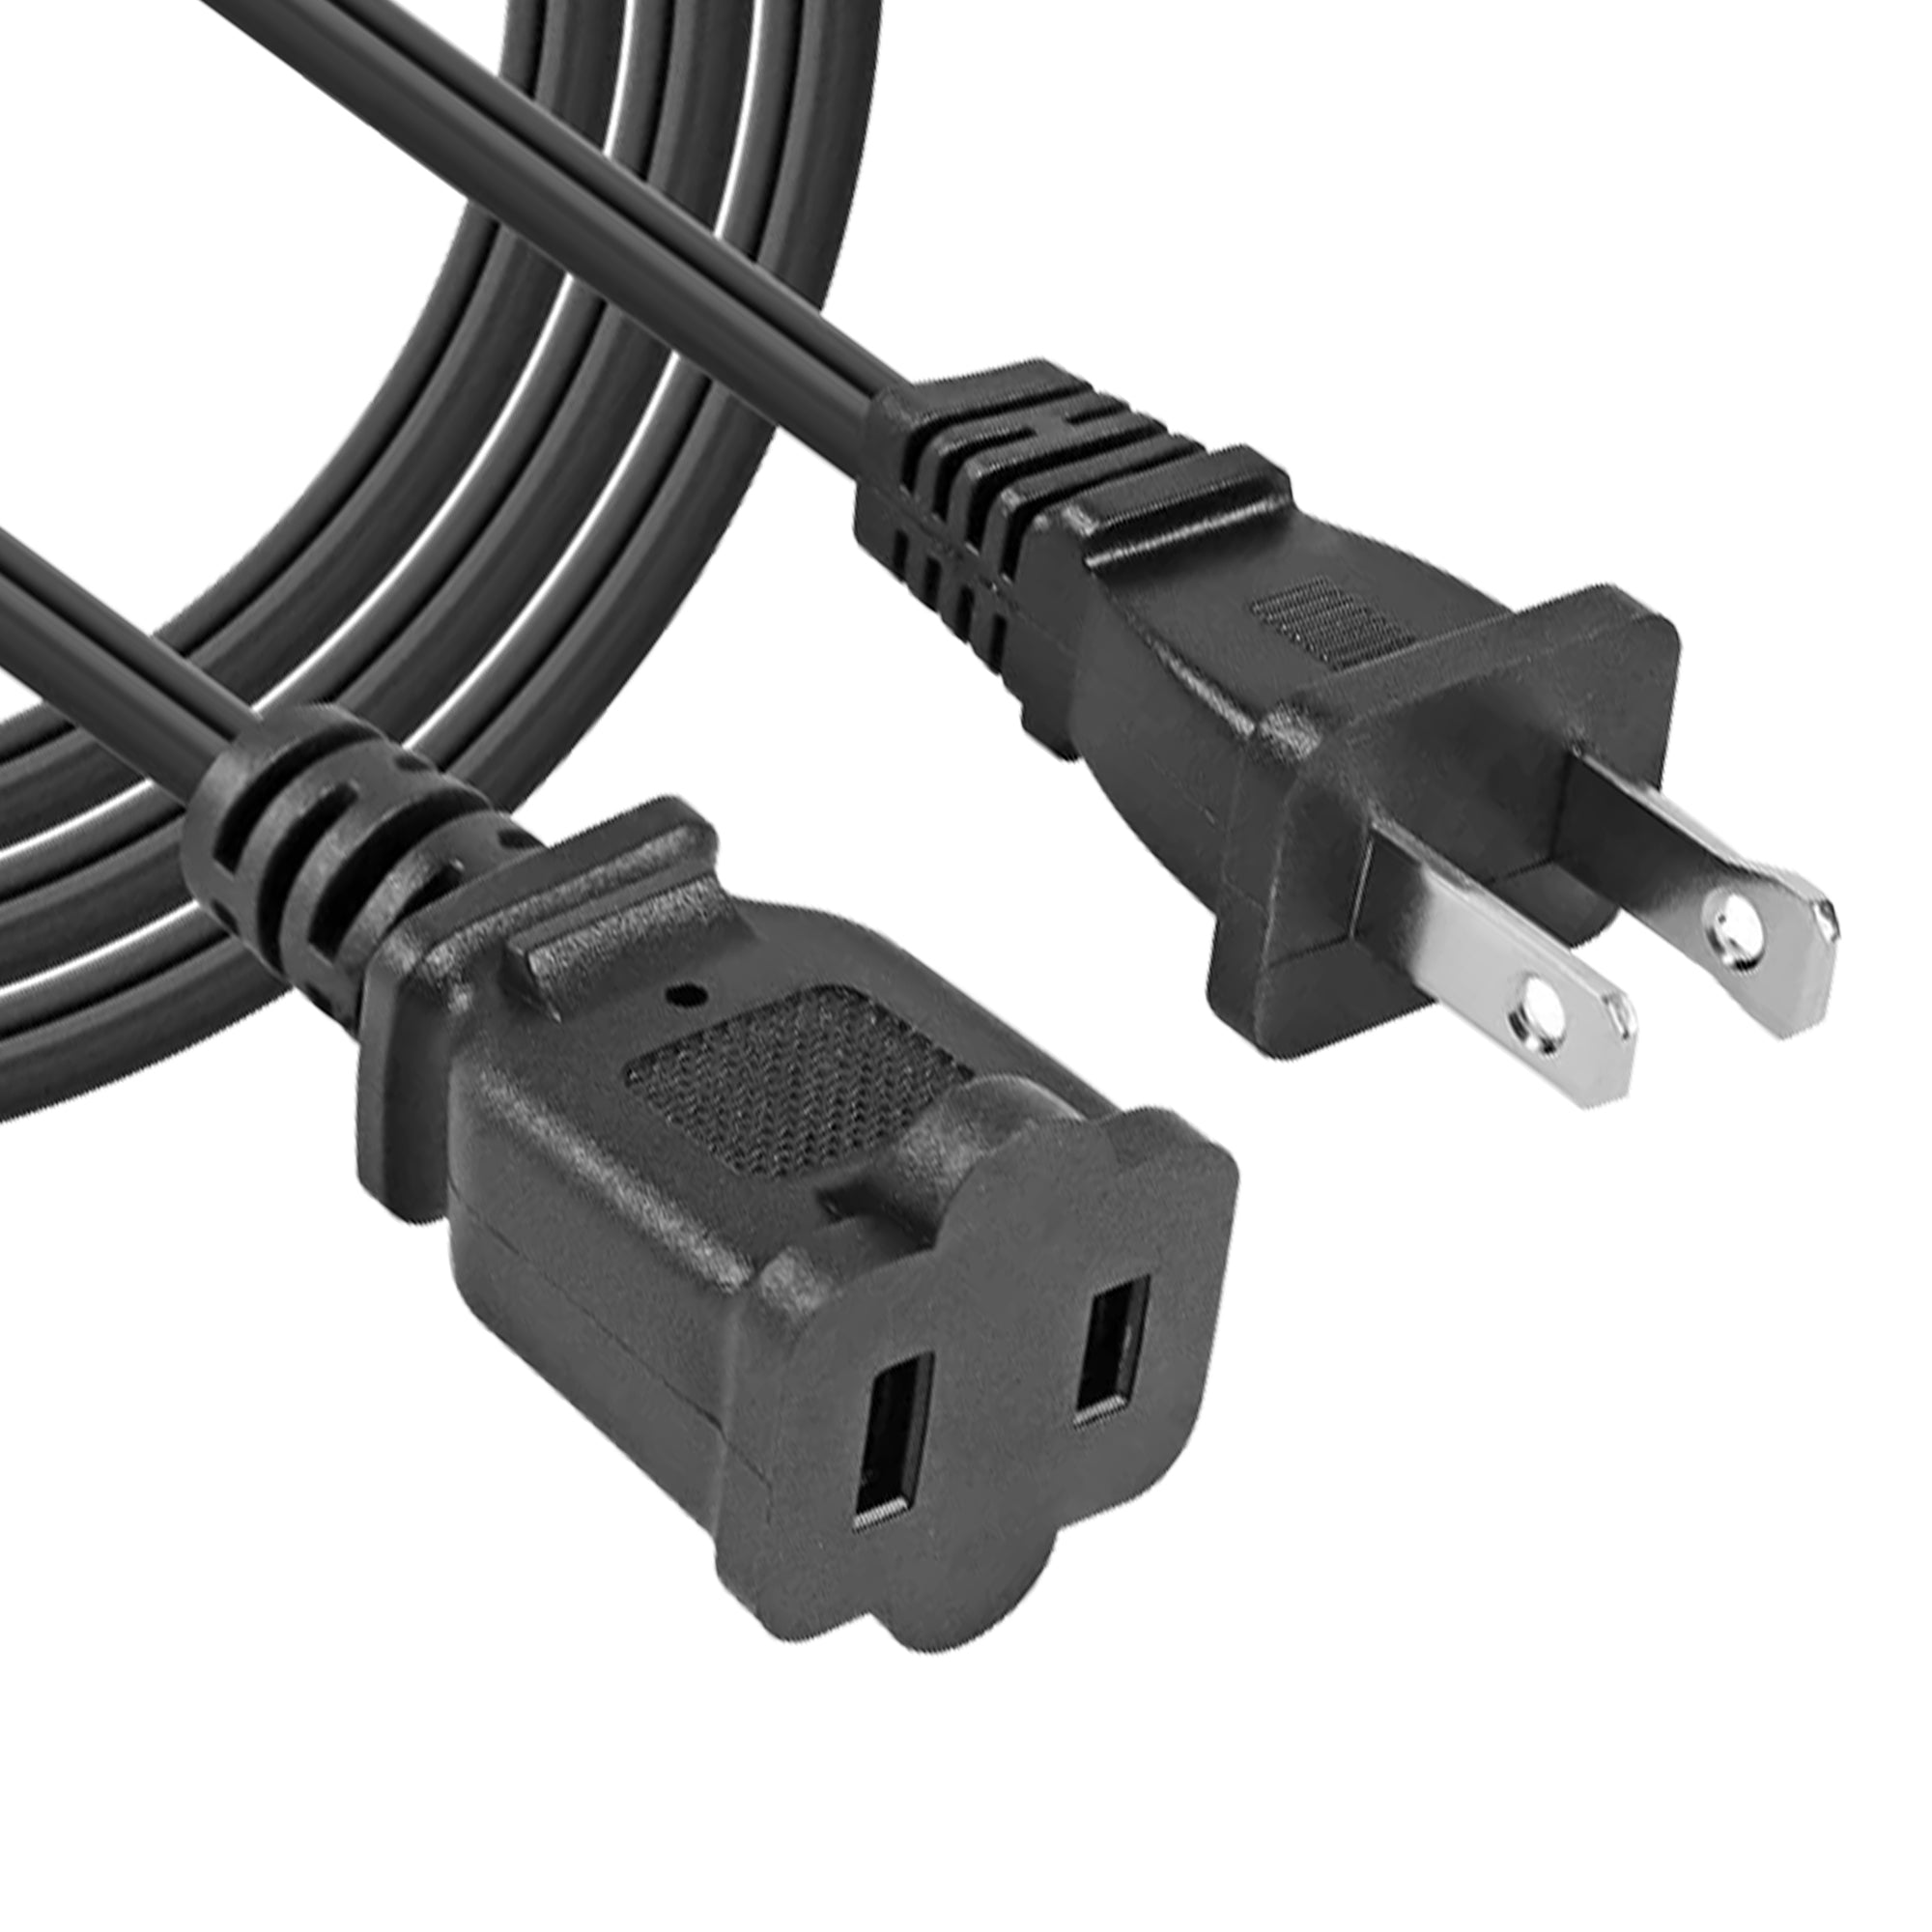 5 Core AC Power Cord 10 Ft • US Polarized Male to Female 2 Prong Extension Adapter Cords 16AWG 125V 1/2 Pc